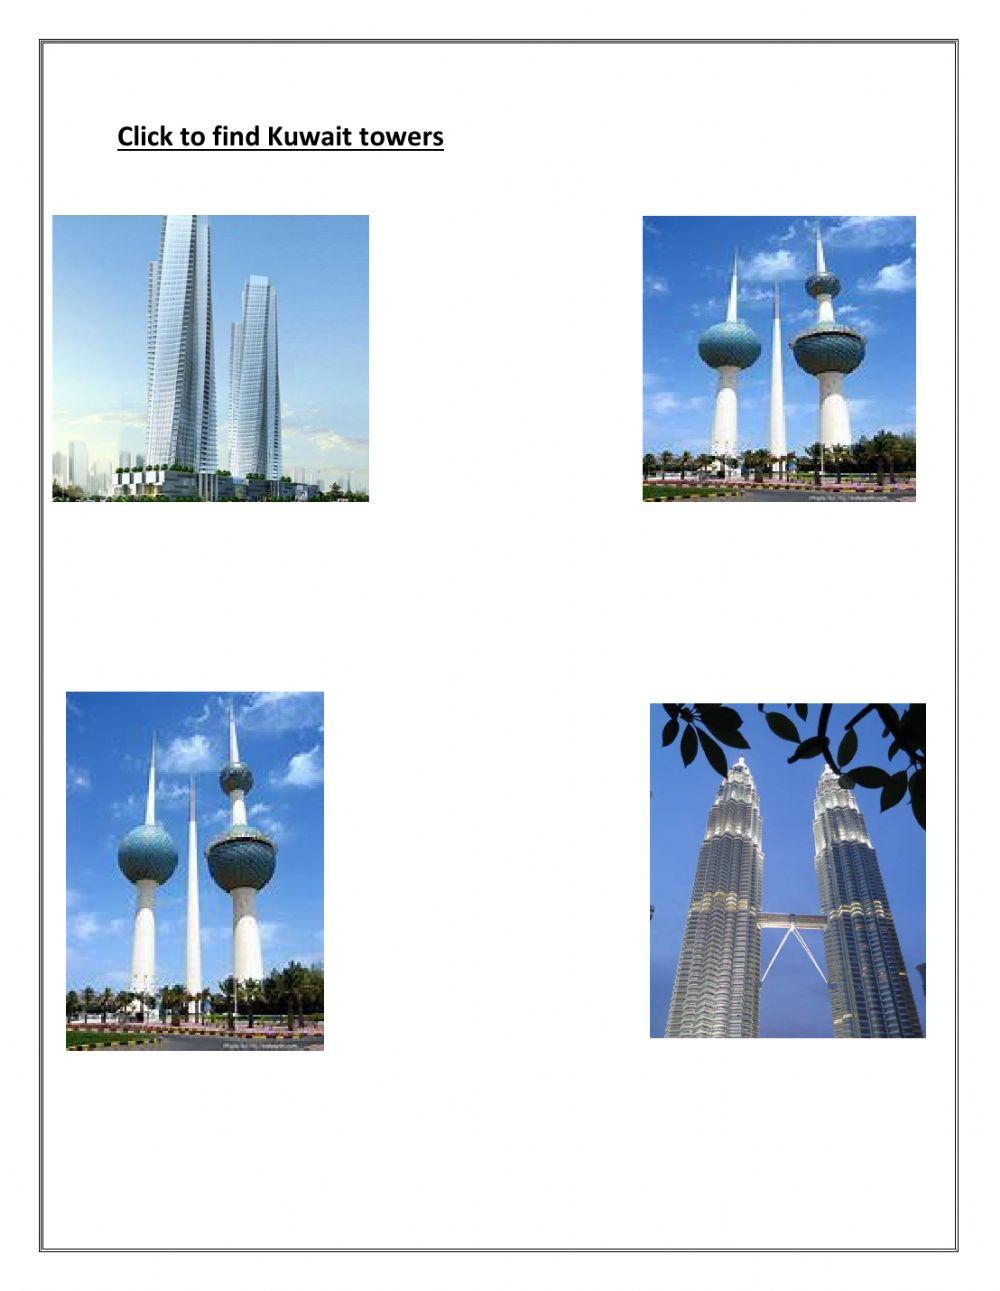 Click on Kuwait Towers